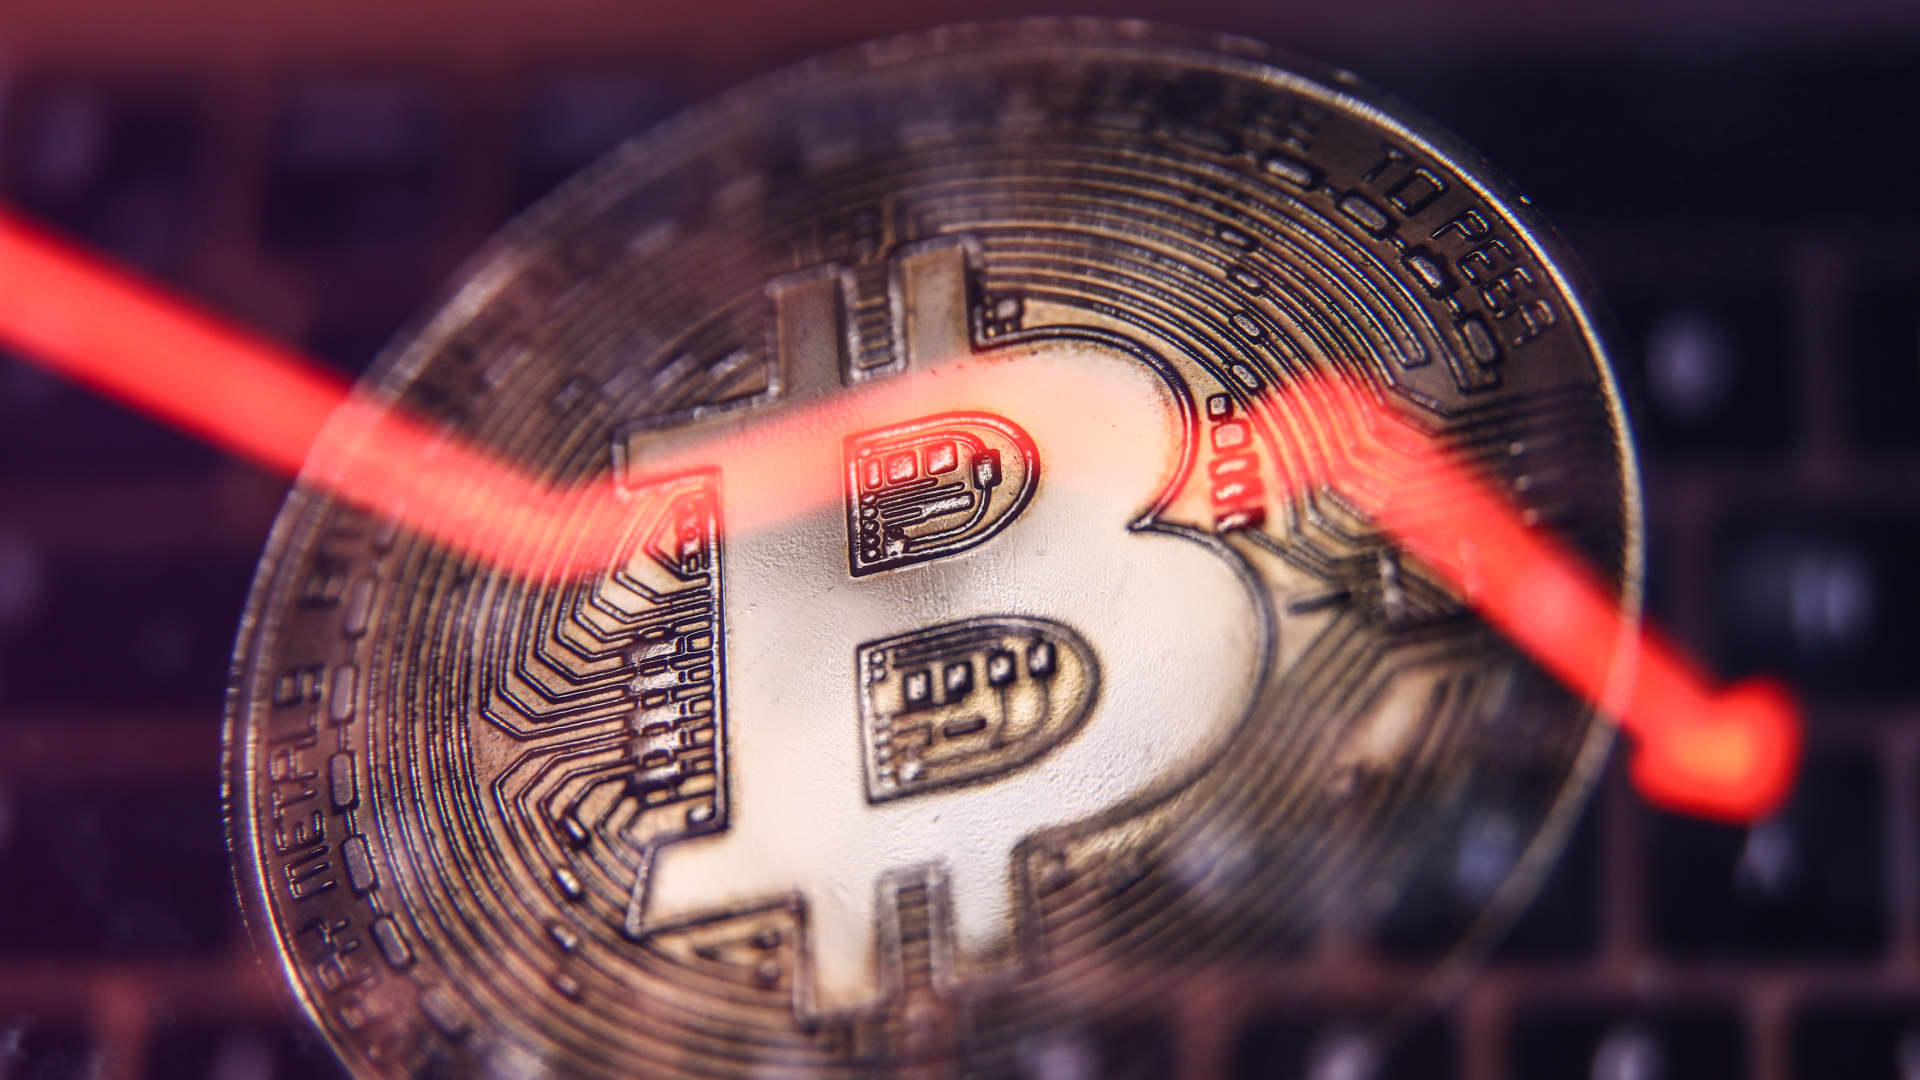 Bitcoin (BTC) falls as market focuses on Celsius issue, Fed rate hike